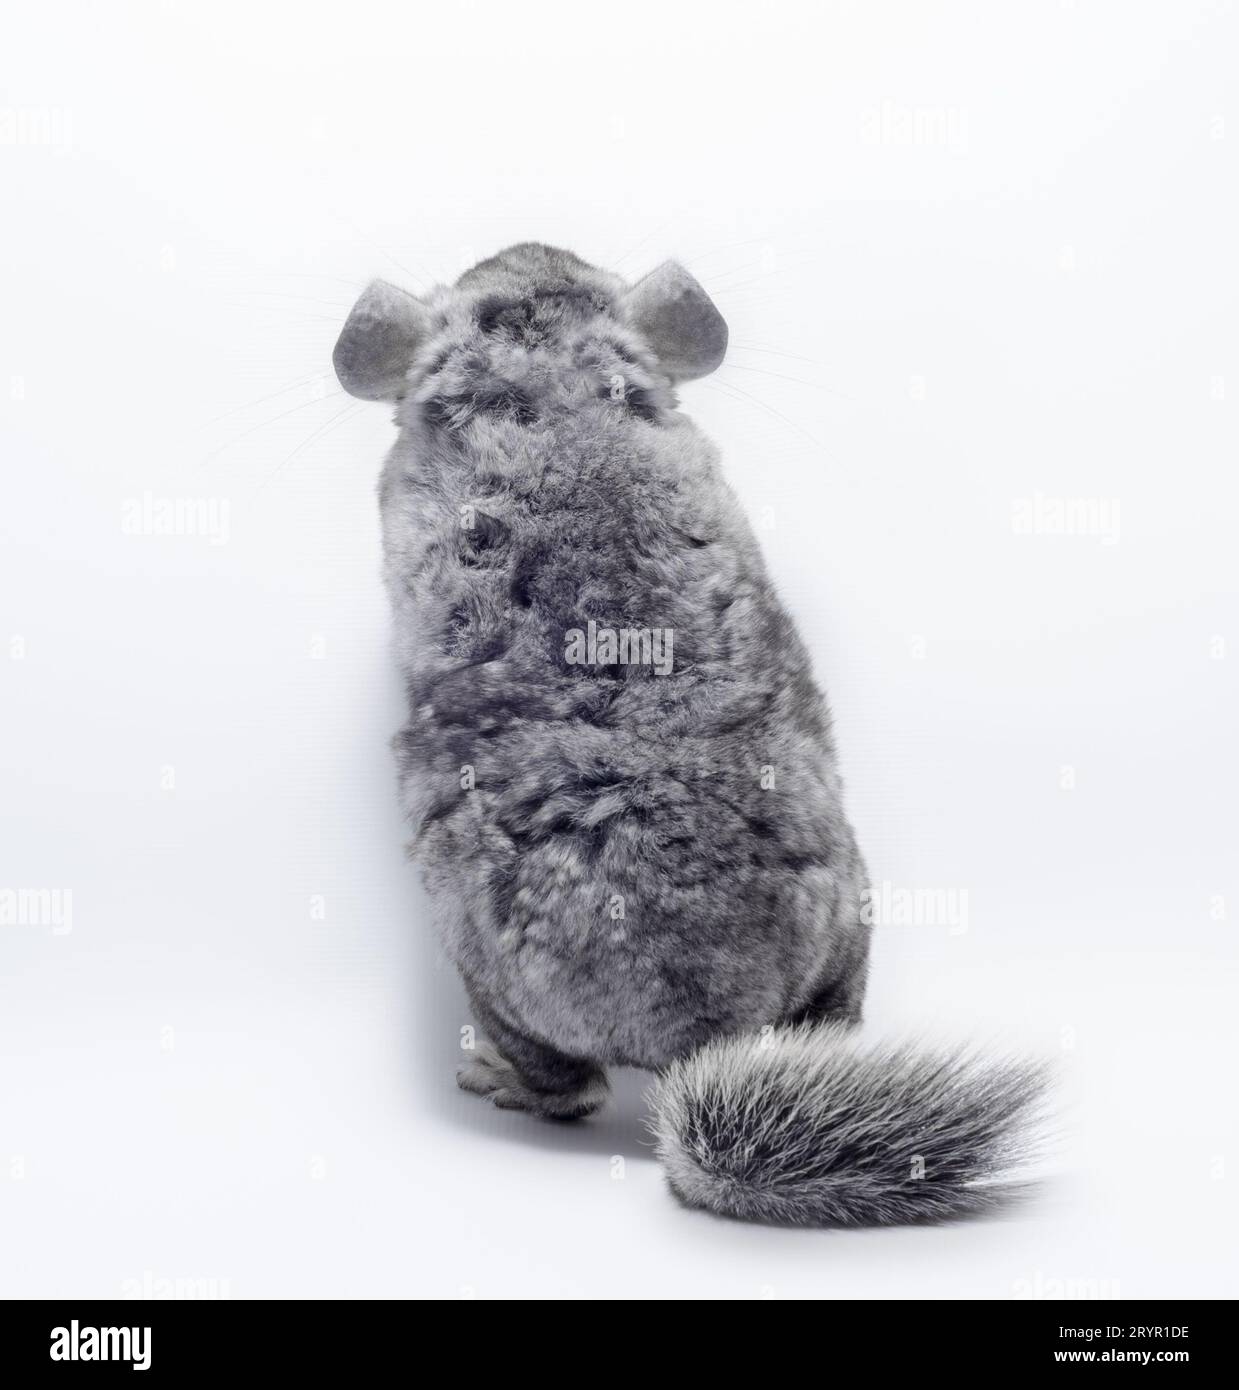 Gray fluffy chinchilla close up isolated on white background back view Stock Photo